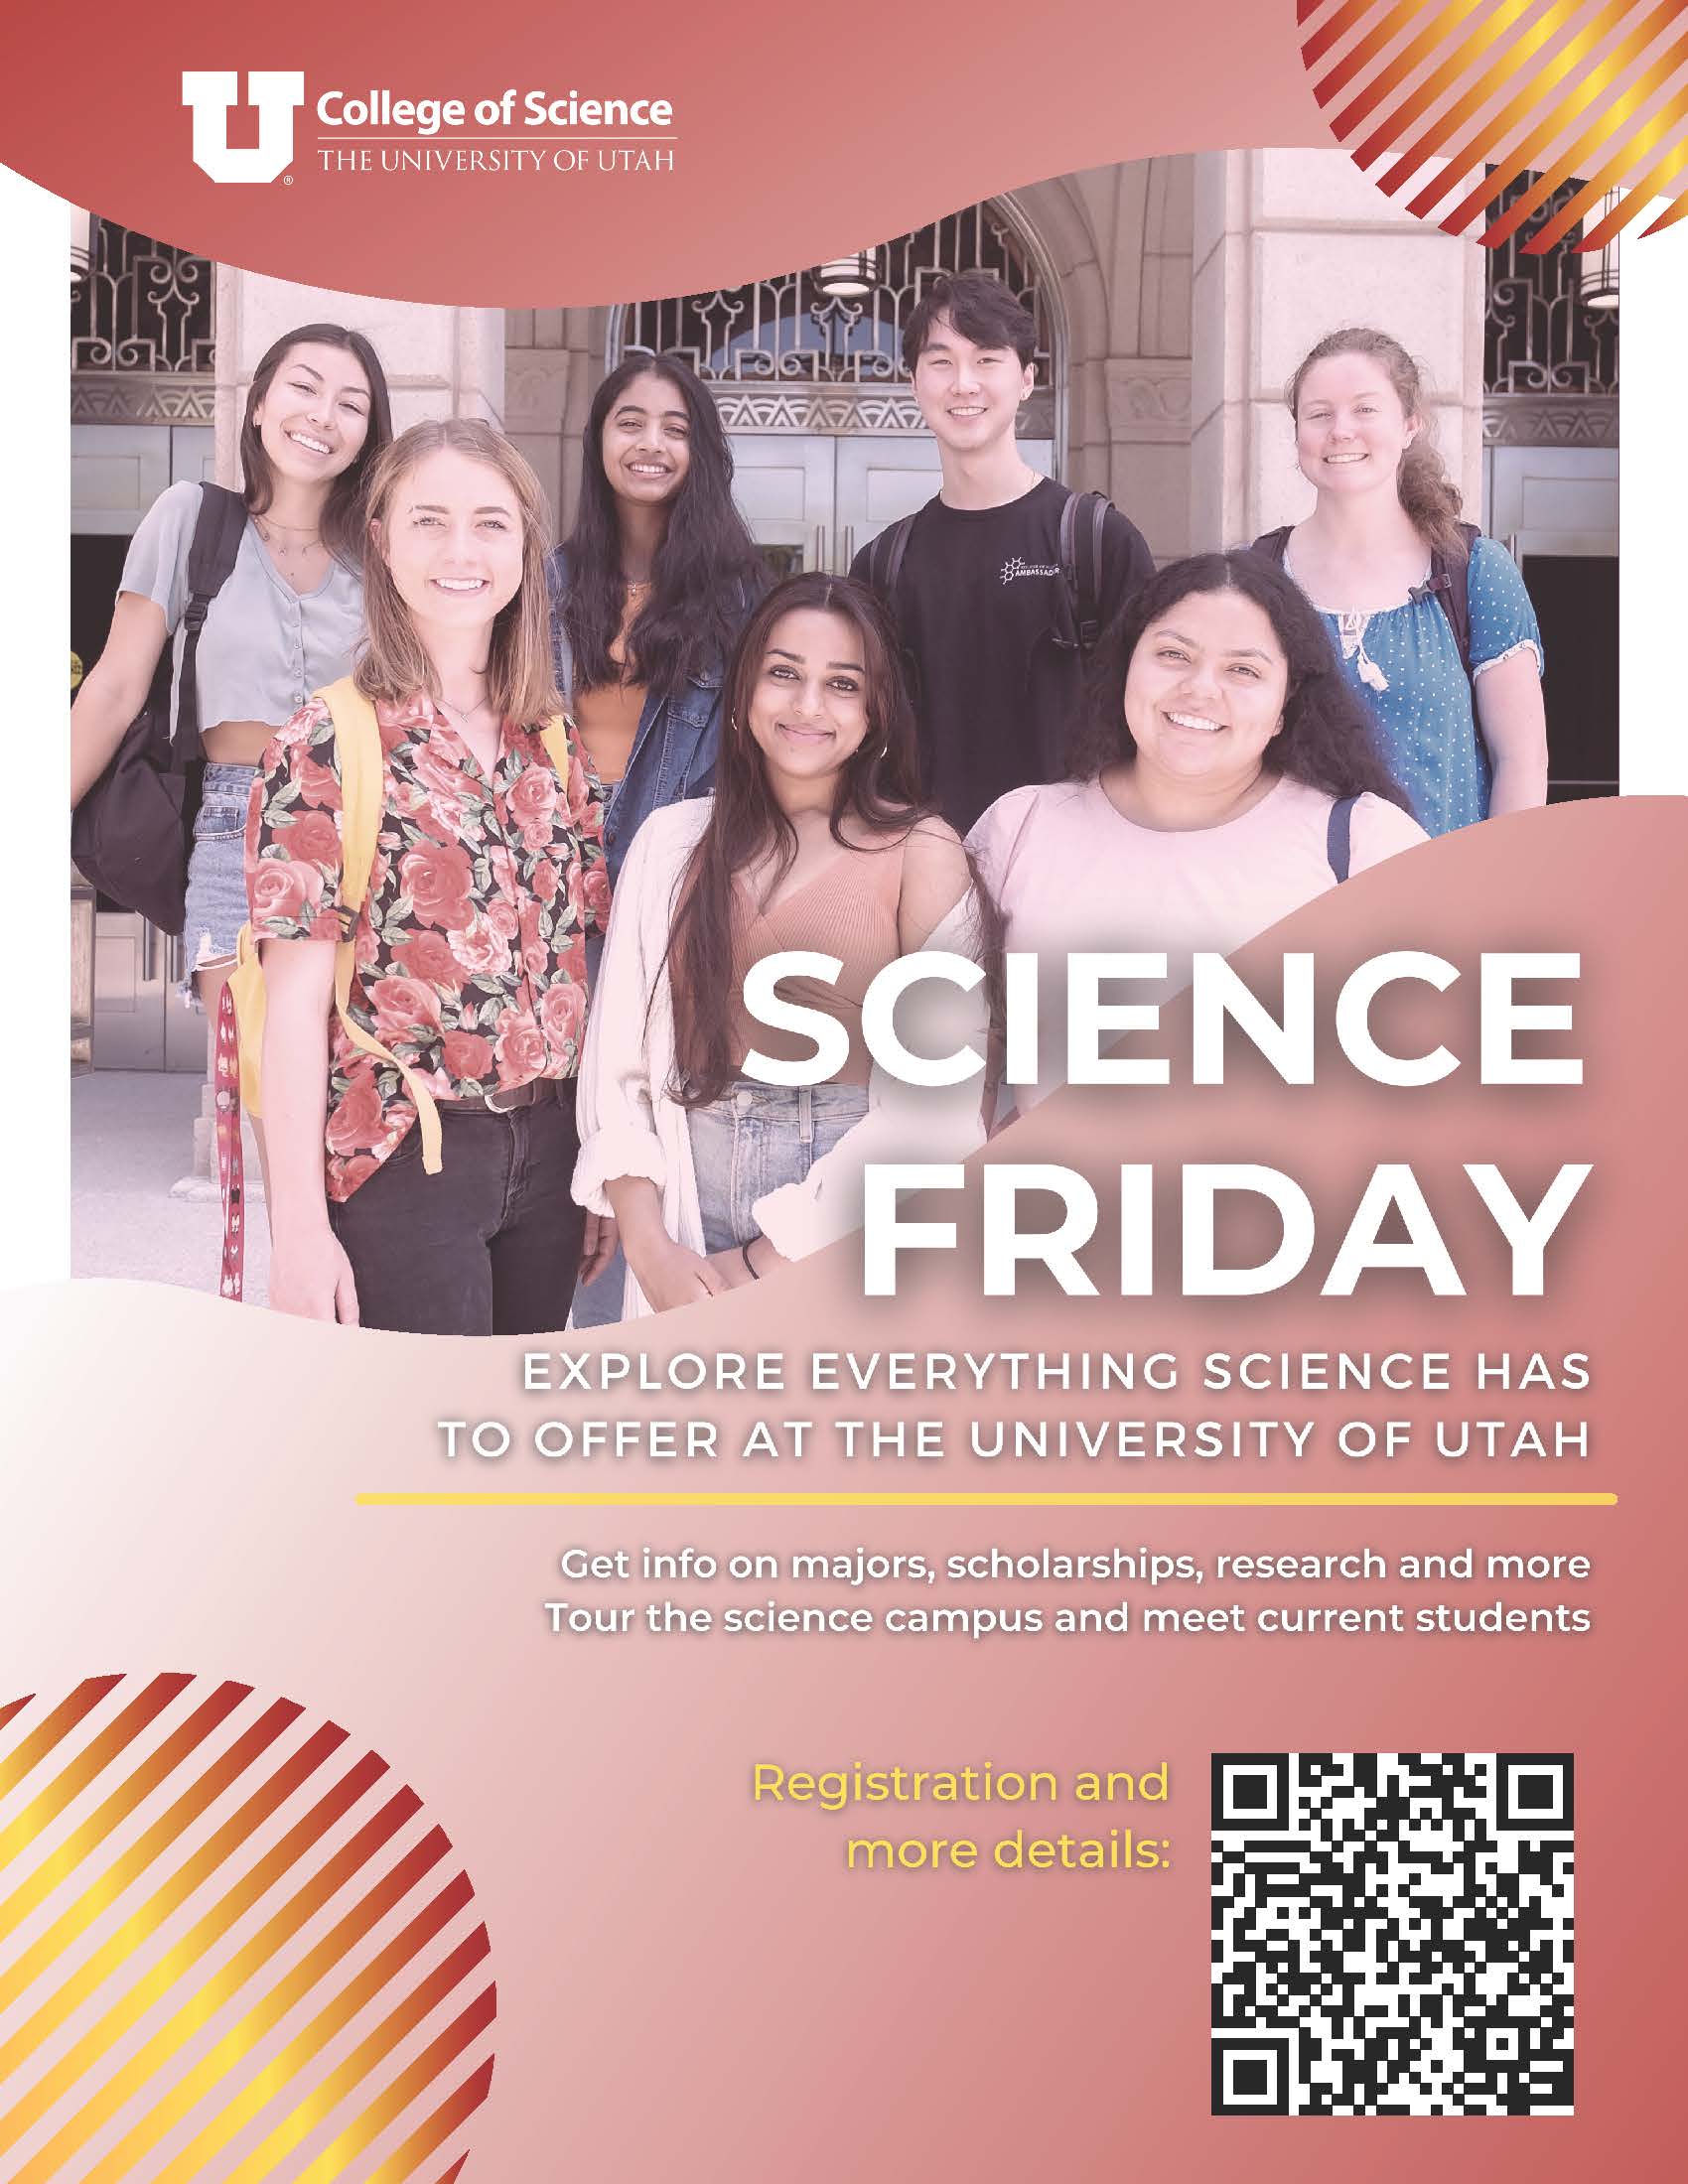 science friday